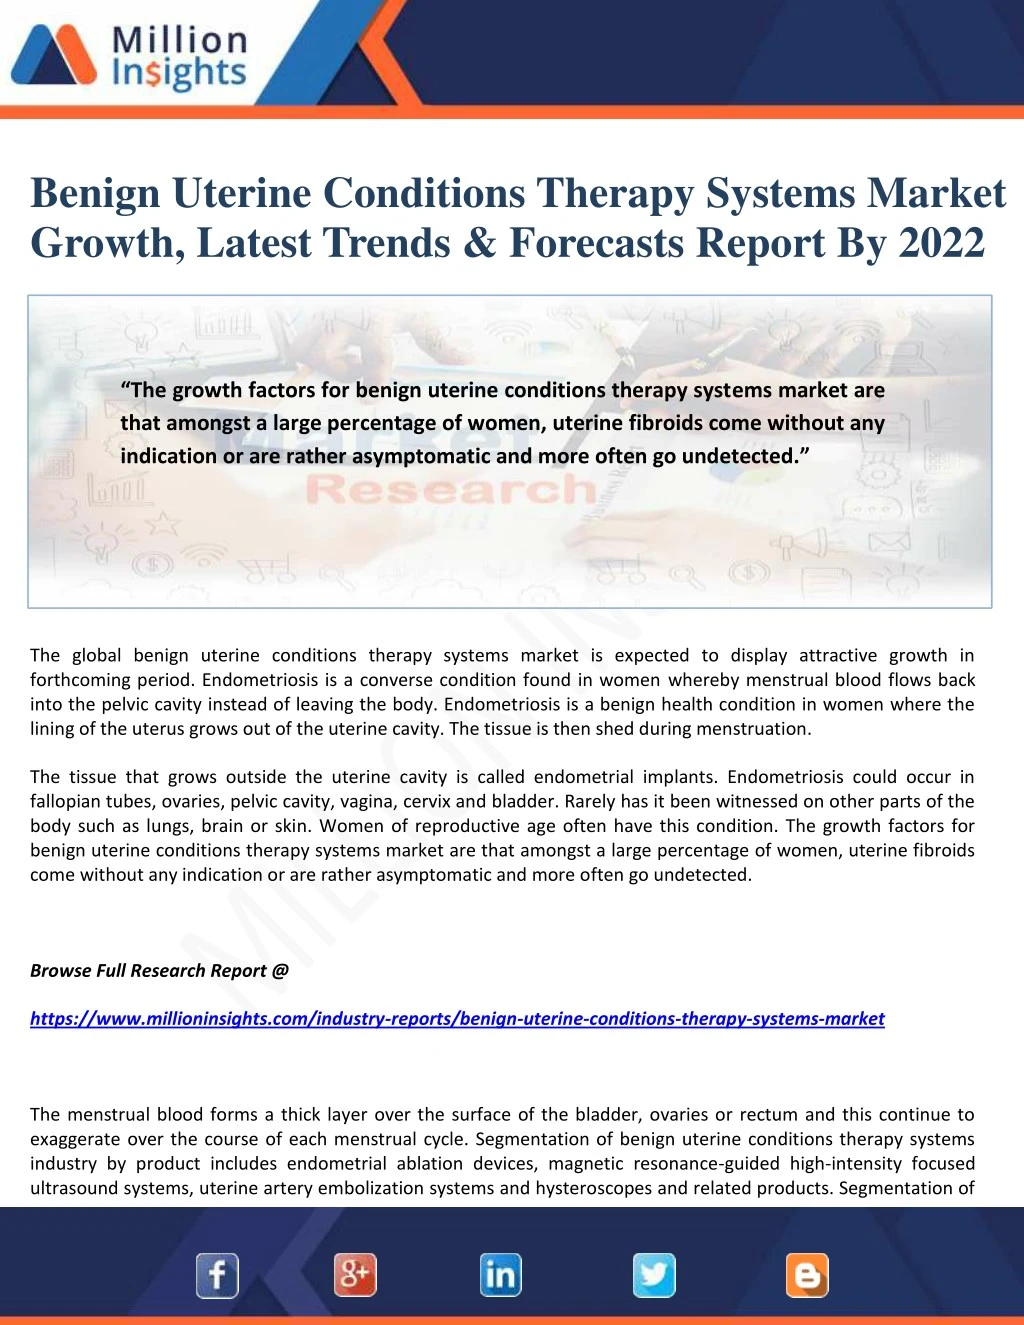 benign uterine conditions therapy systems market